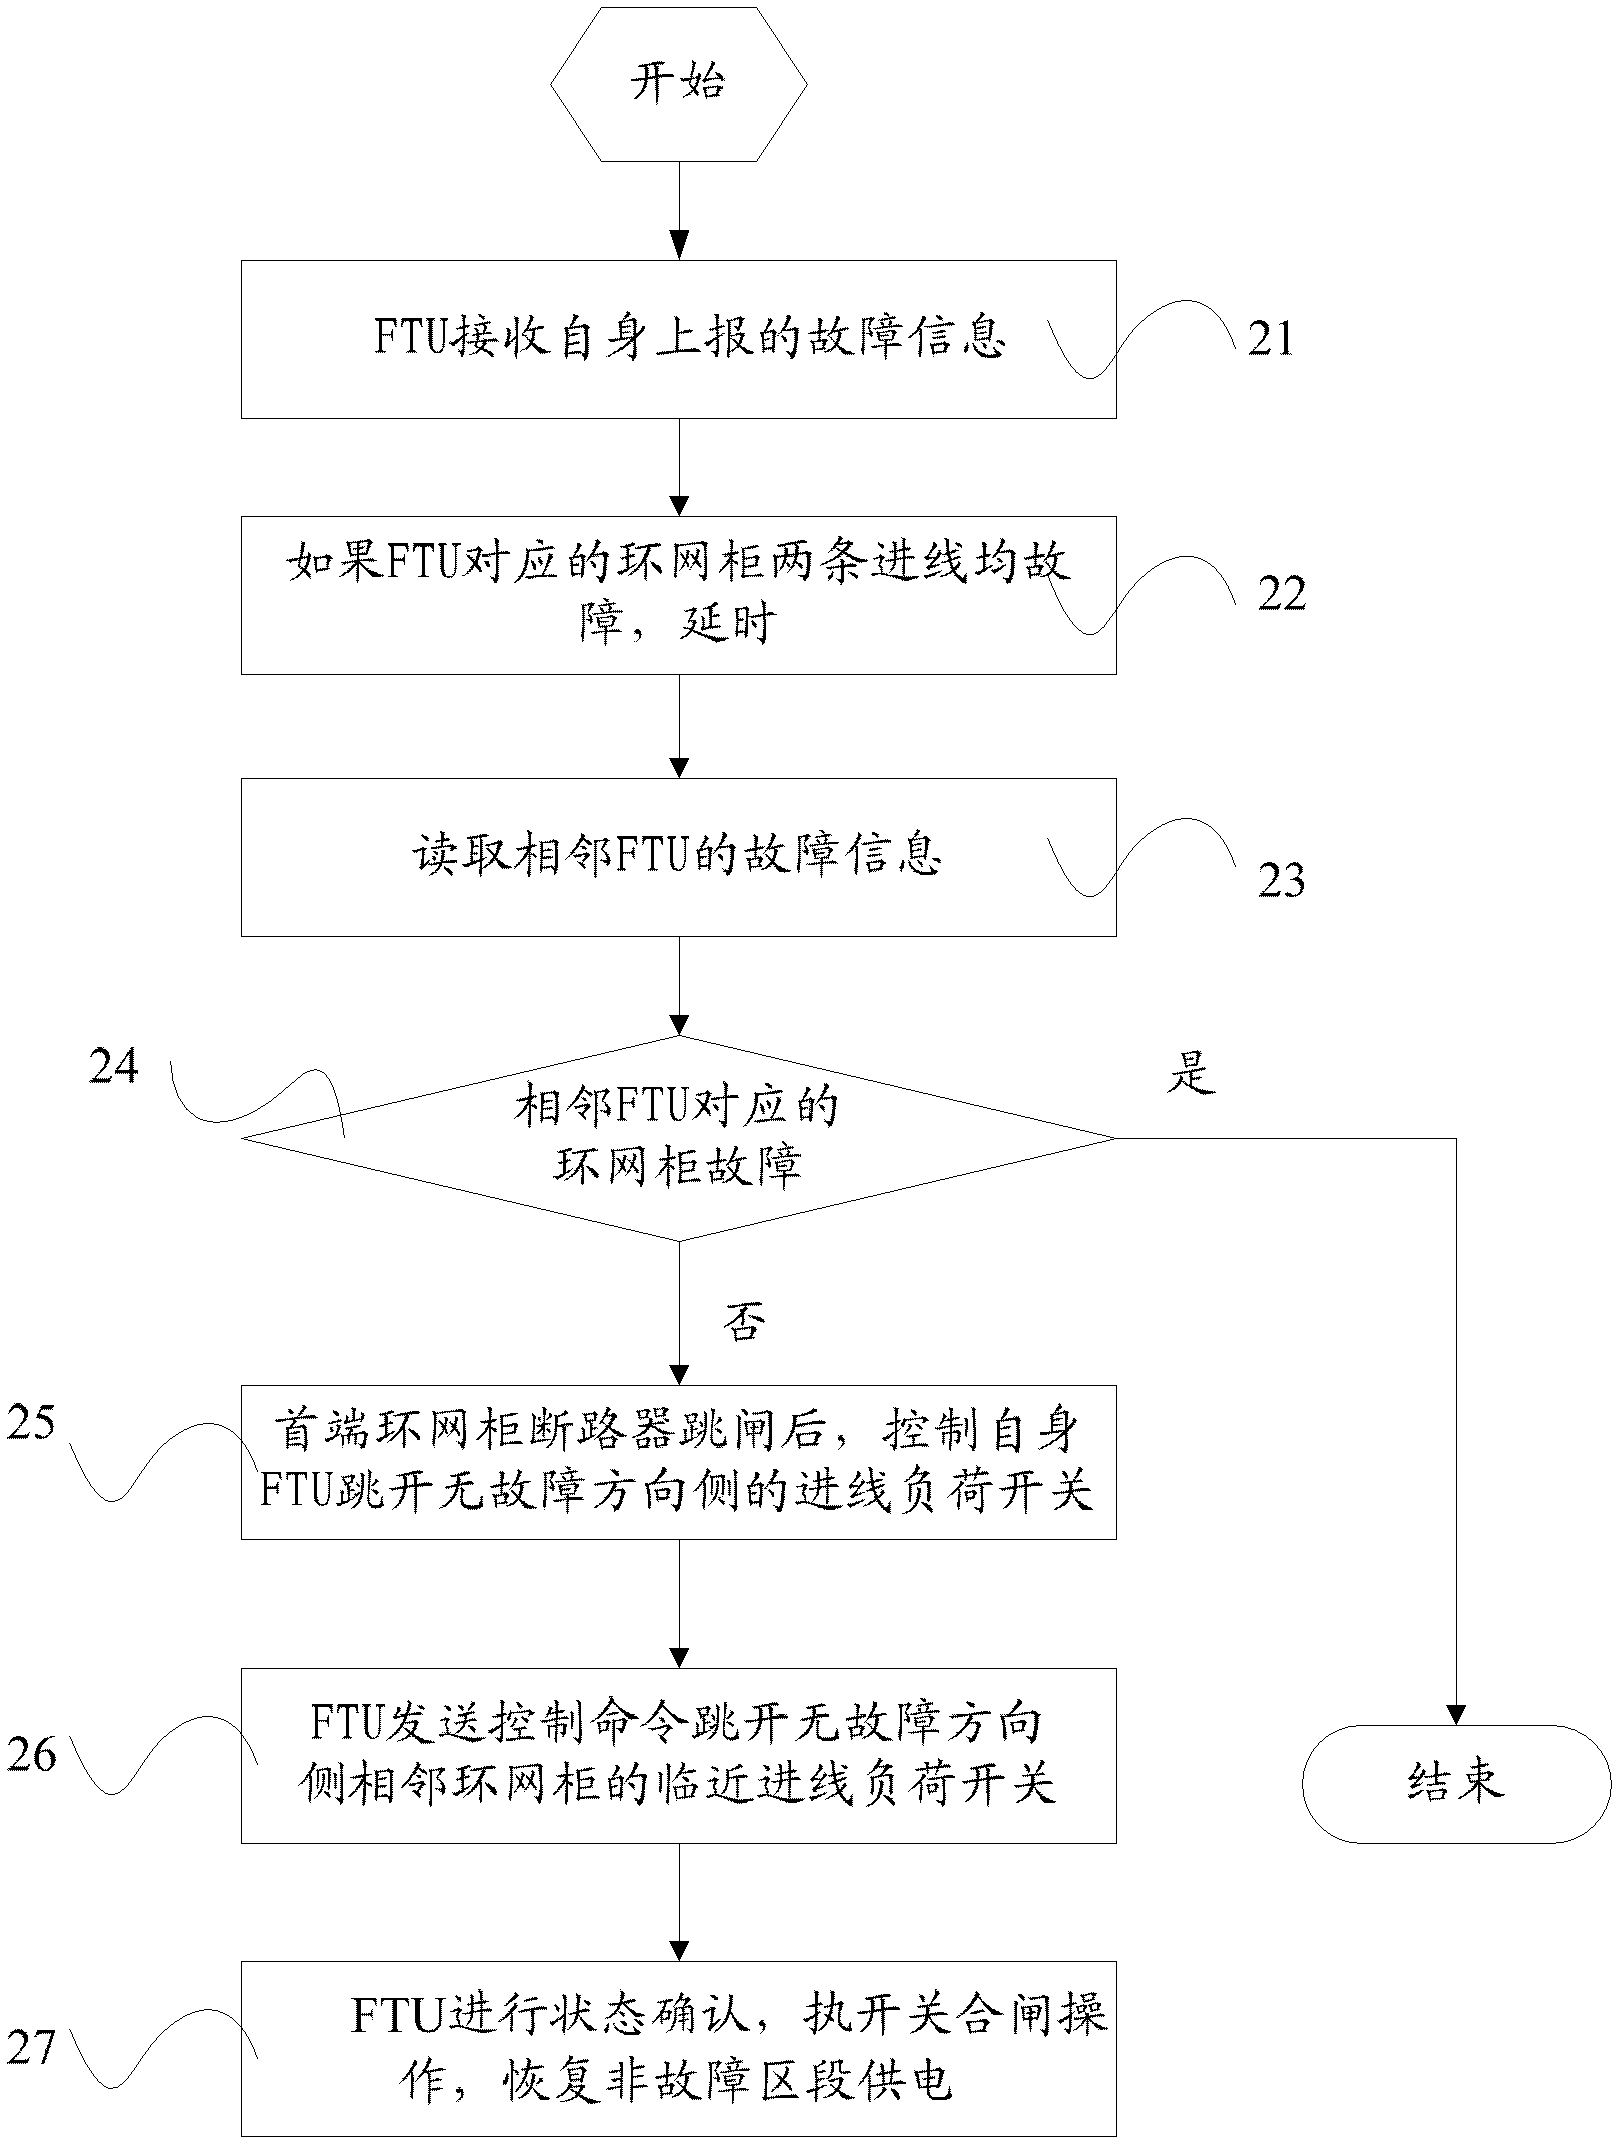 Method and system for realizing fault self-healing